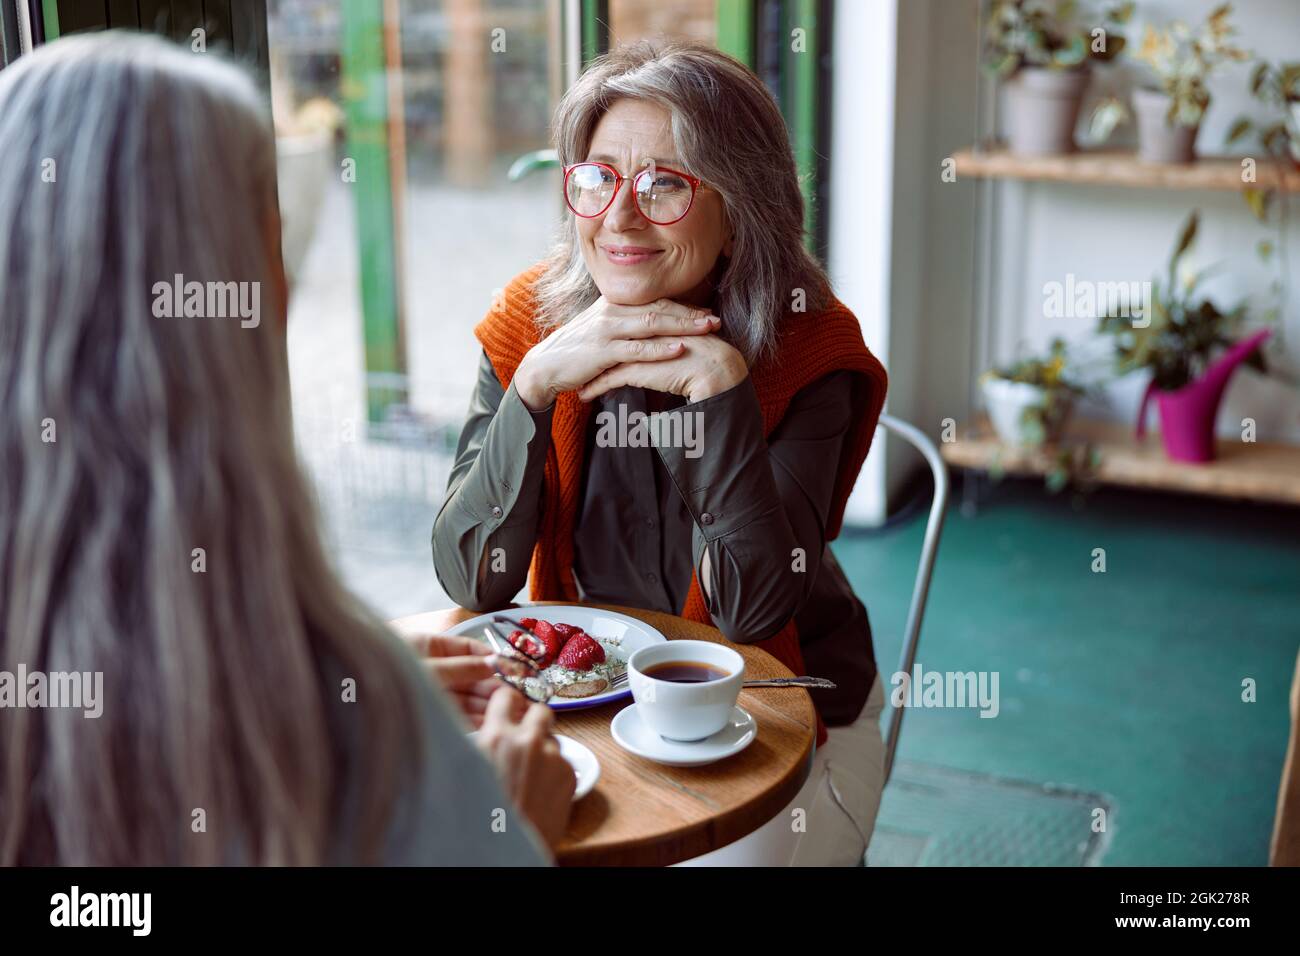 Grey haired woman with glasses looks at friend sitting at small table in cozy cafe Stock Photo